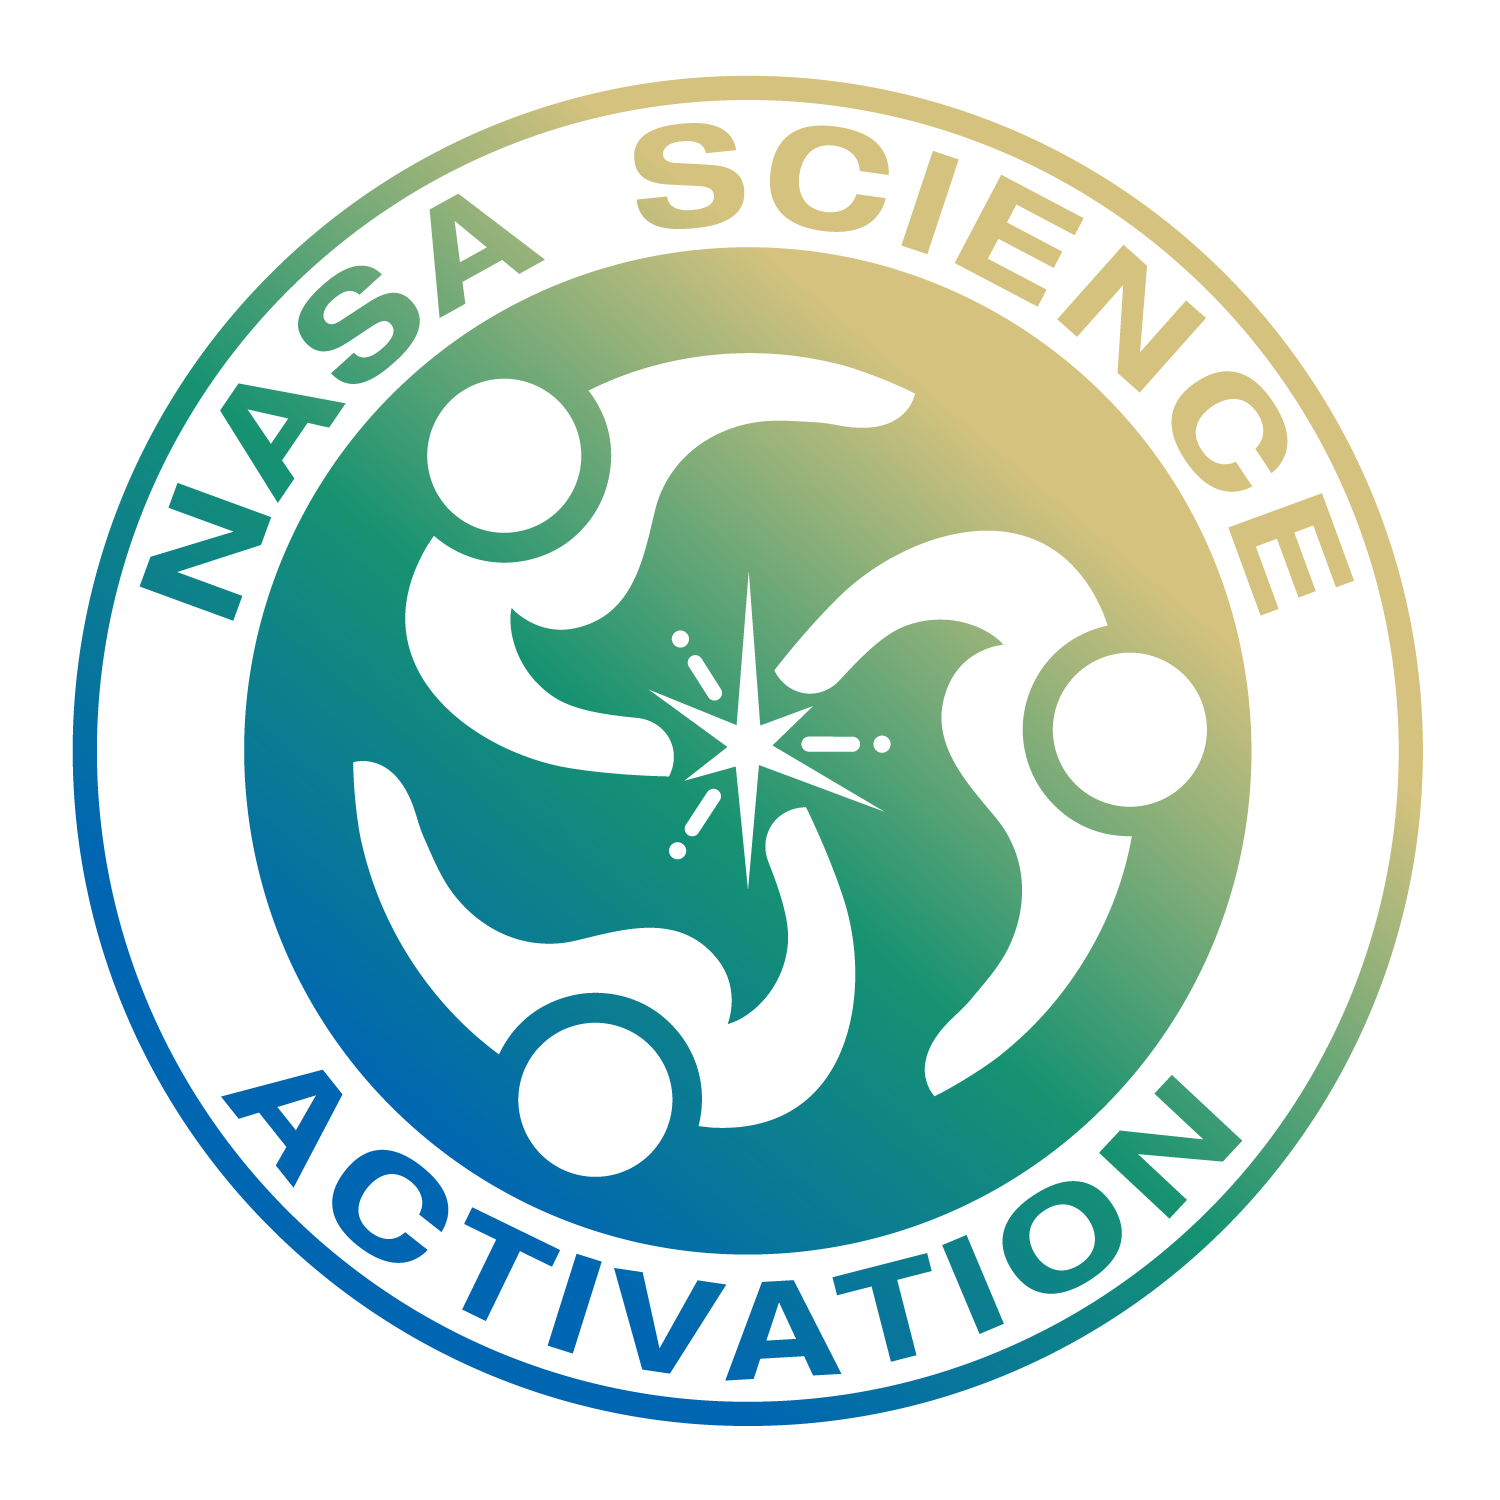 blue, green, and yellow circle with smaller circle inside; between circles is text "NASA Science Activation"; inside the smaller circle are three human cartoon figures working together